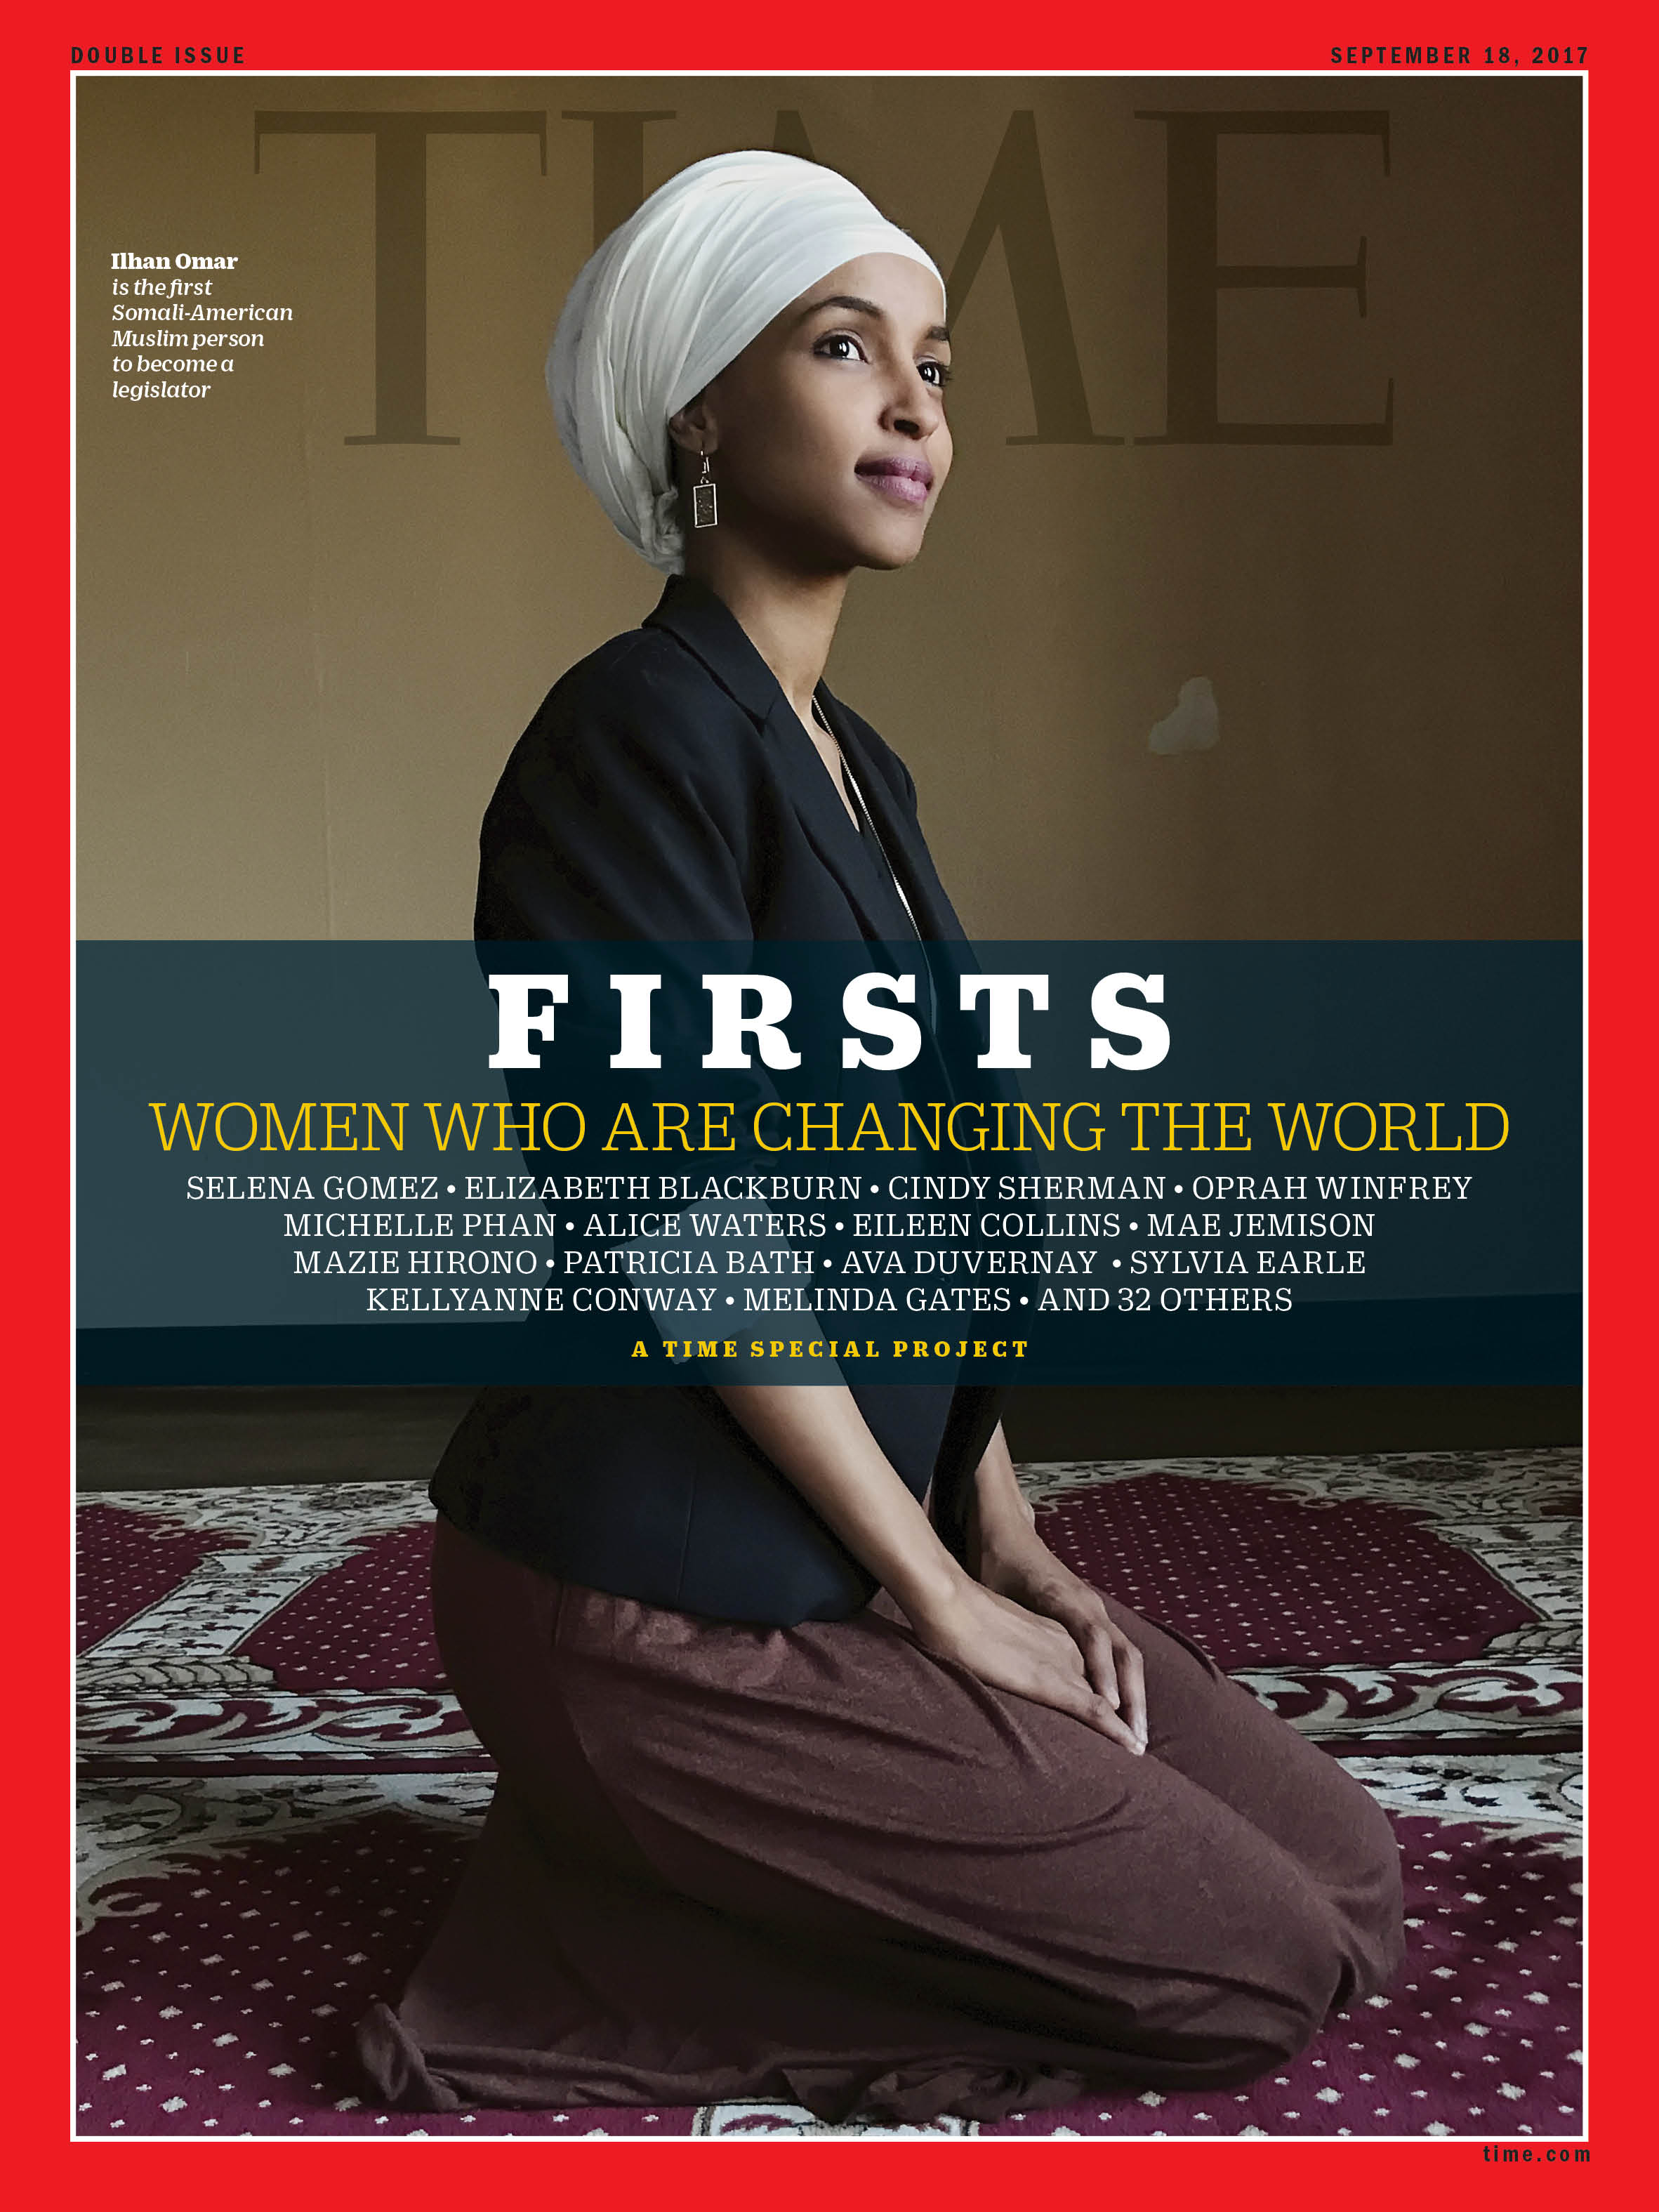 Firsts Women Who Are Changing the World Ilhan Omar Time Magazine Cover